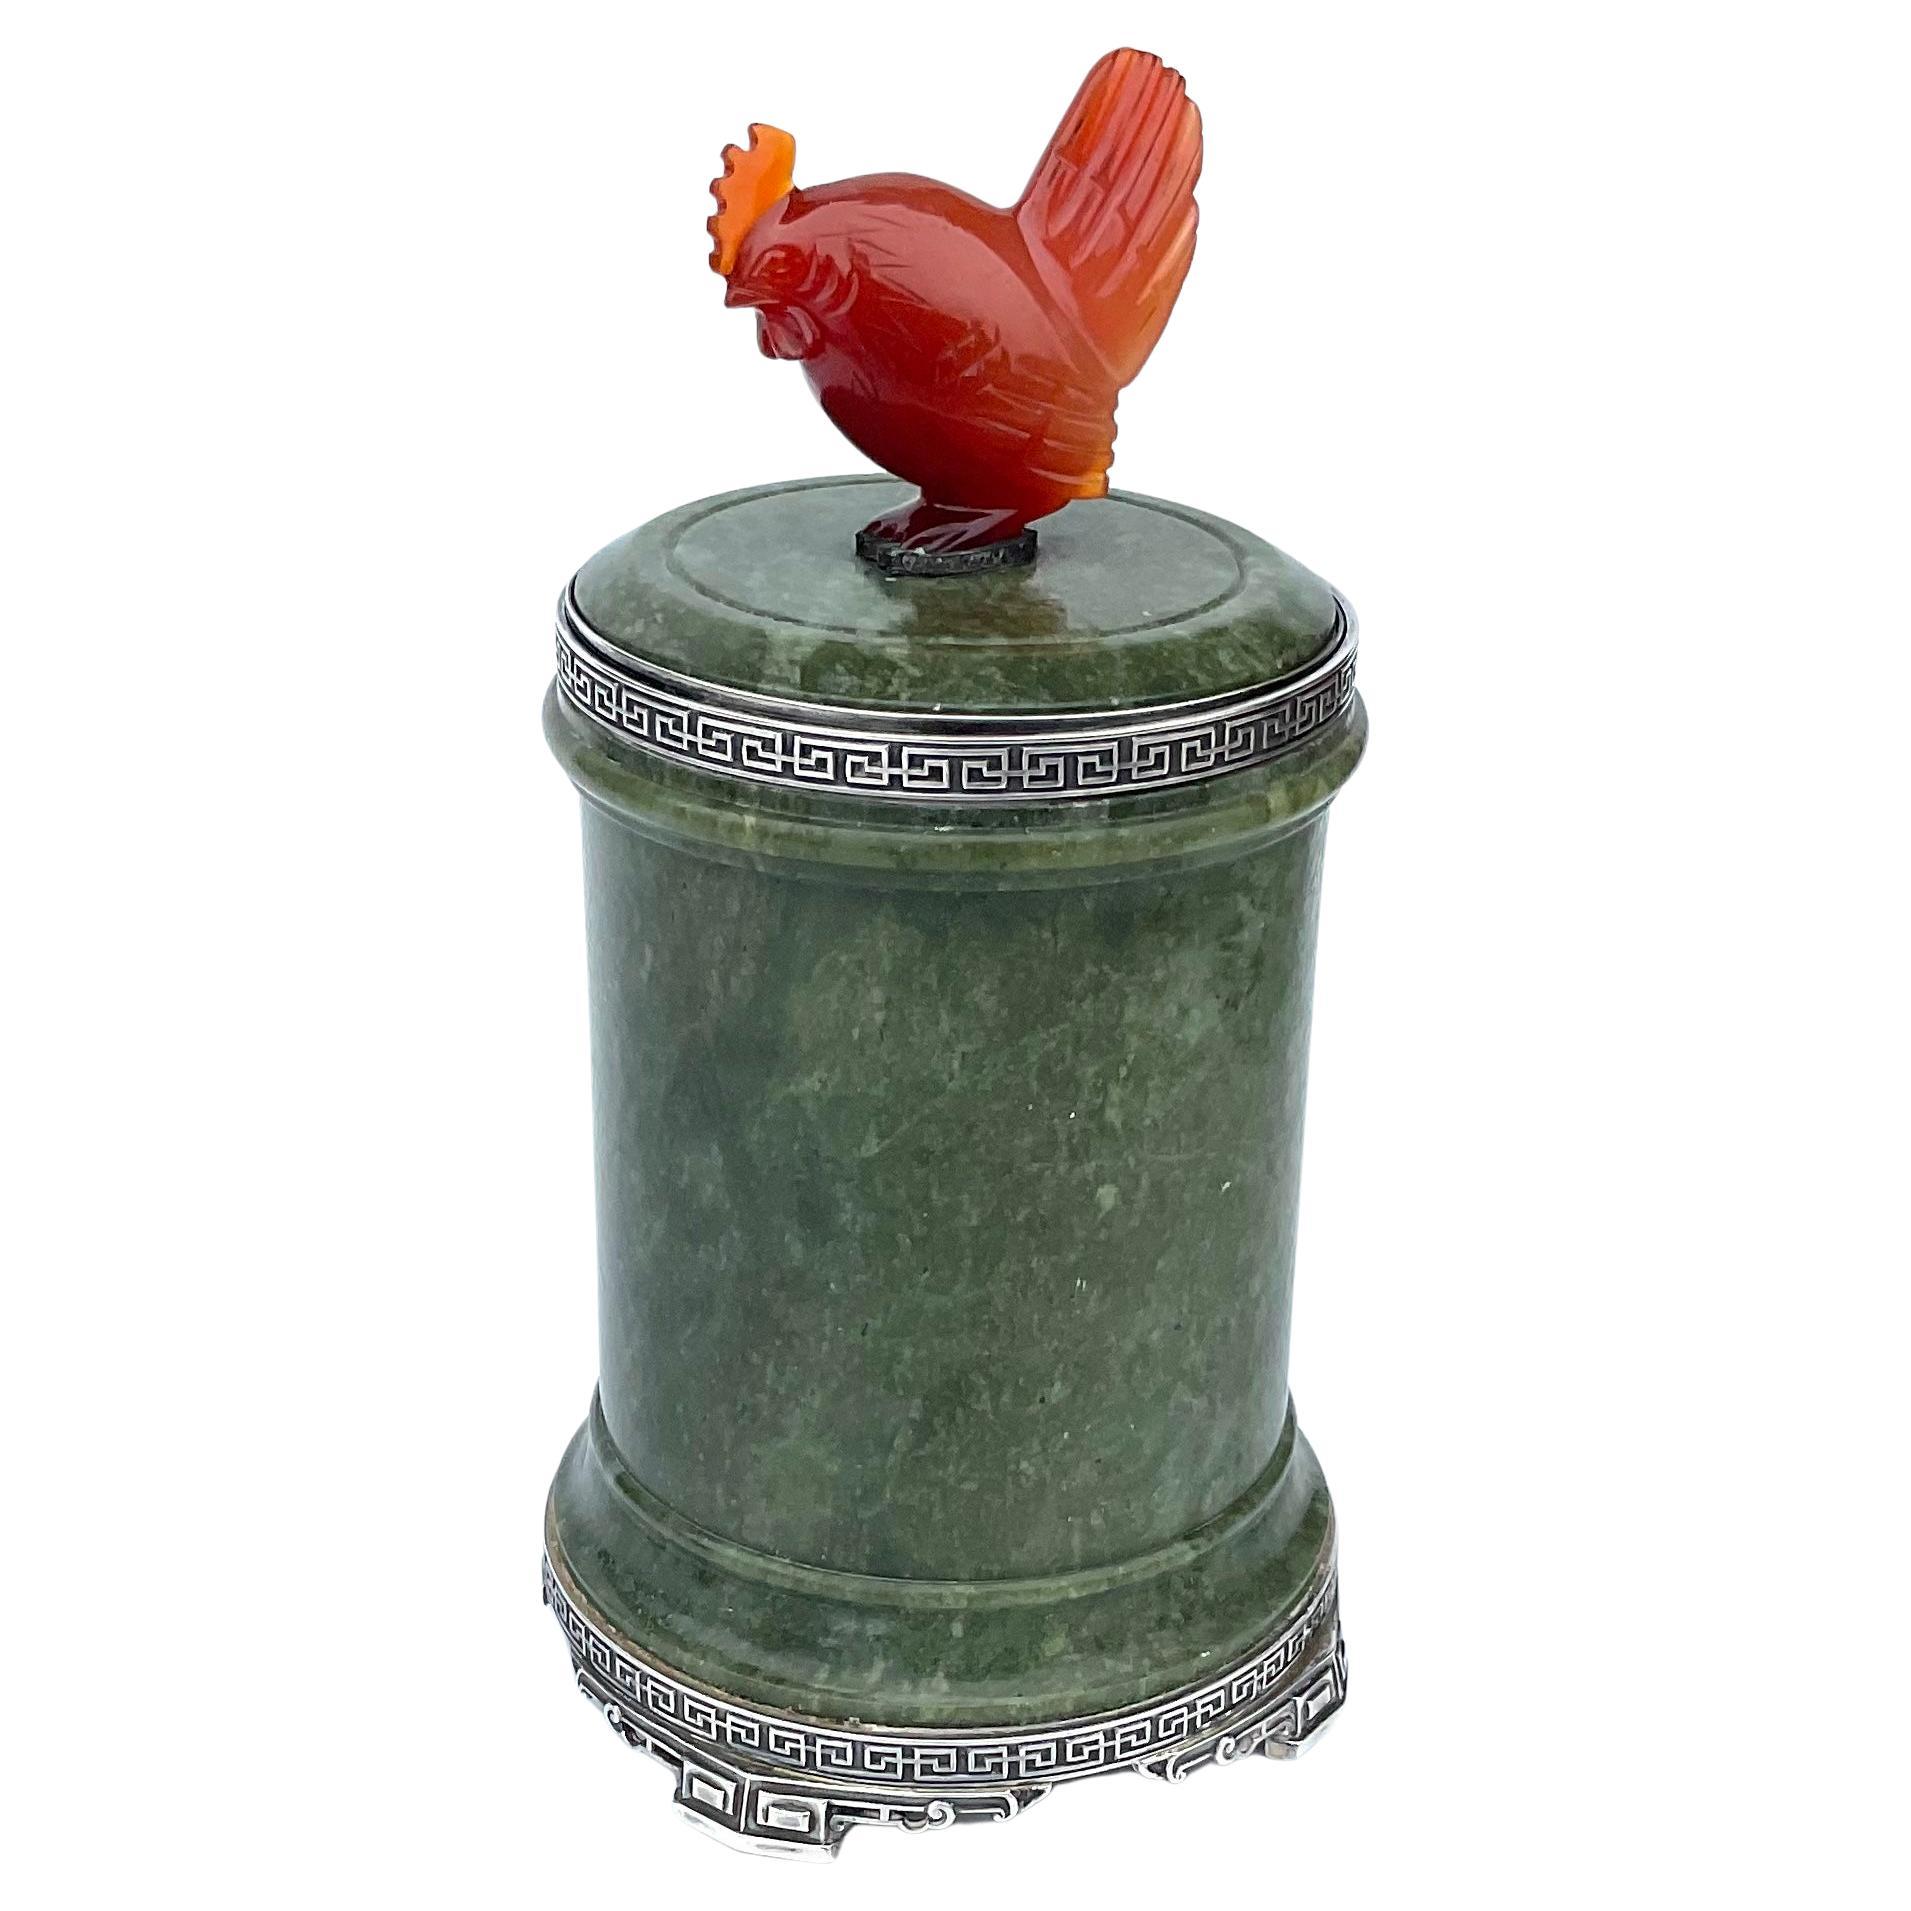 Jade Carnelian and Sterling Cigarette Box with Decorative Rooster Top circa 1920